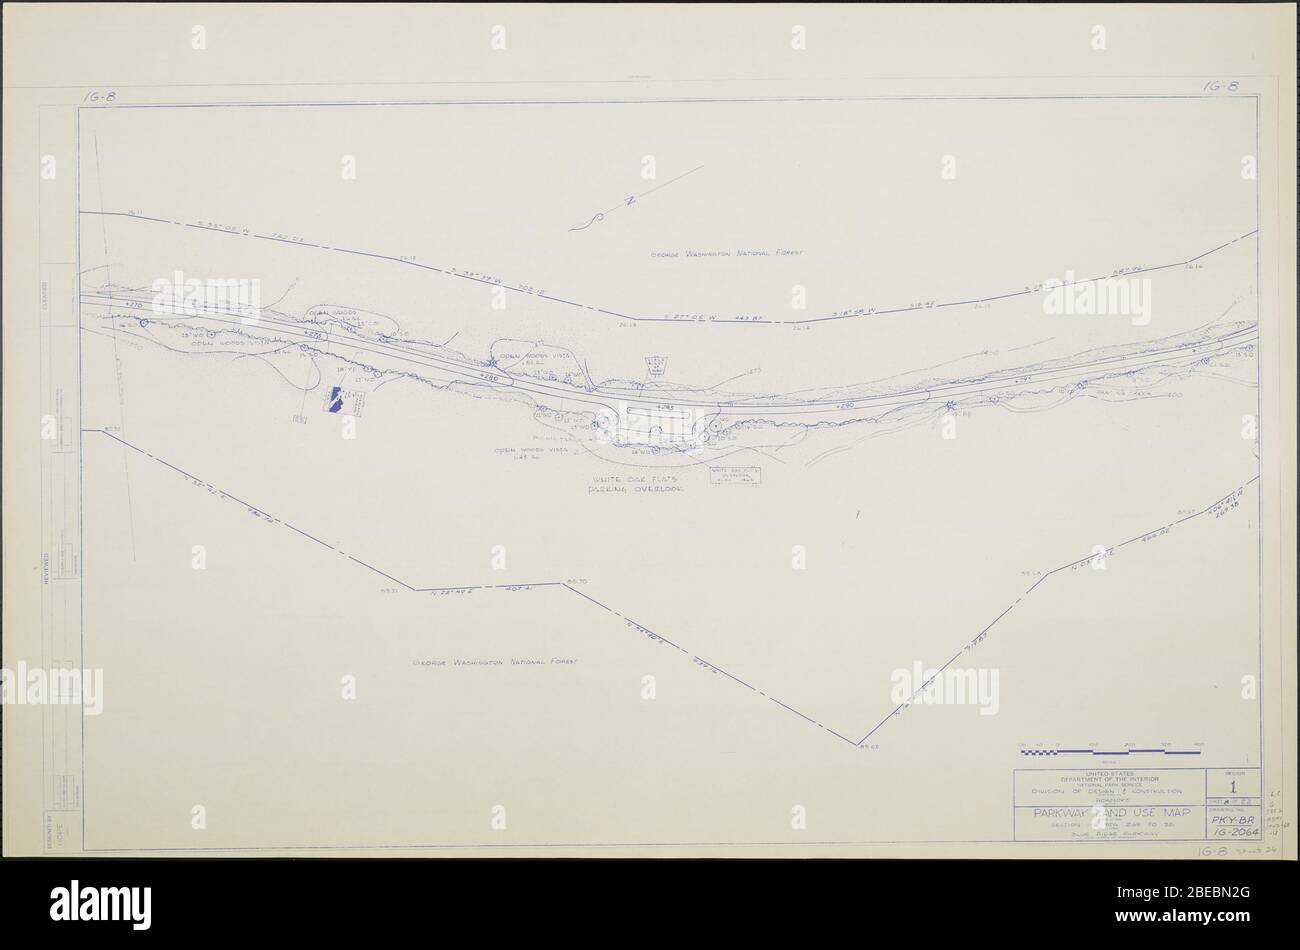 'Blue Ridge Parkway, Region 1 Sheet 8; A map of the Blue Ridge Parkway with details about the nearby trees, shrubbery, and seedlings. Includes the George Washington National Forest and White Oak Flats Parking Overlook. Drawing No. 1G-8. Scale 1=100'.; ' Stock Photo